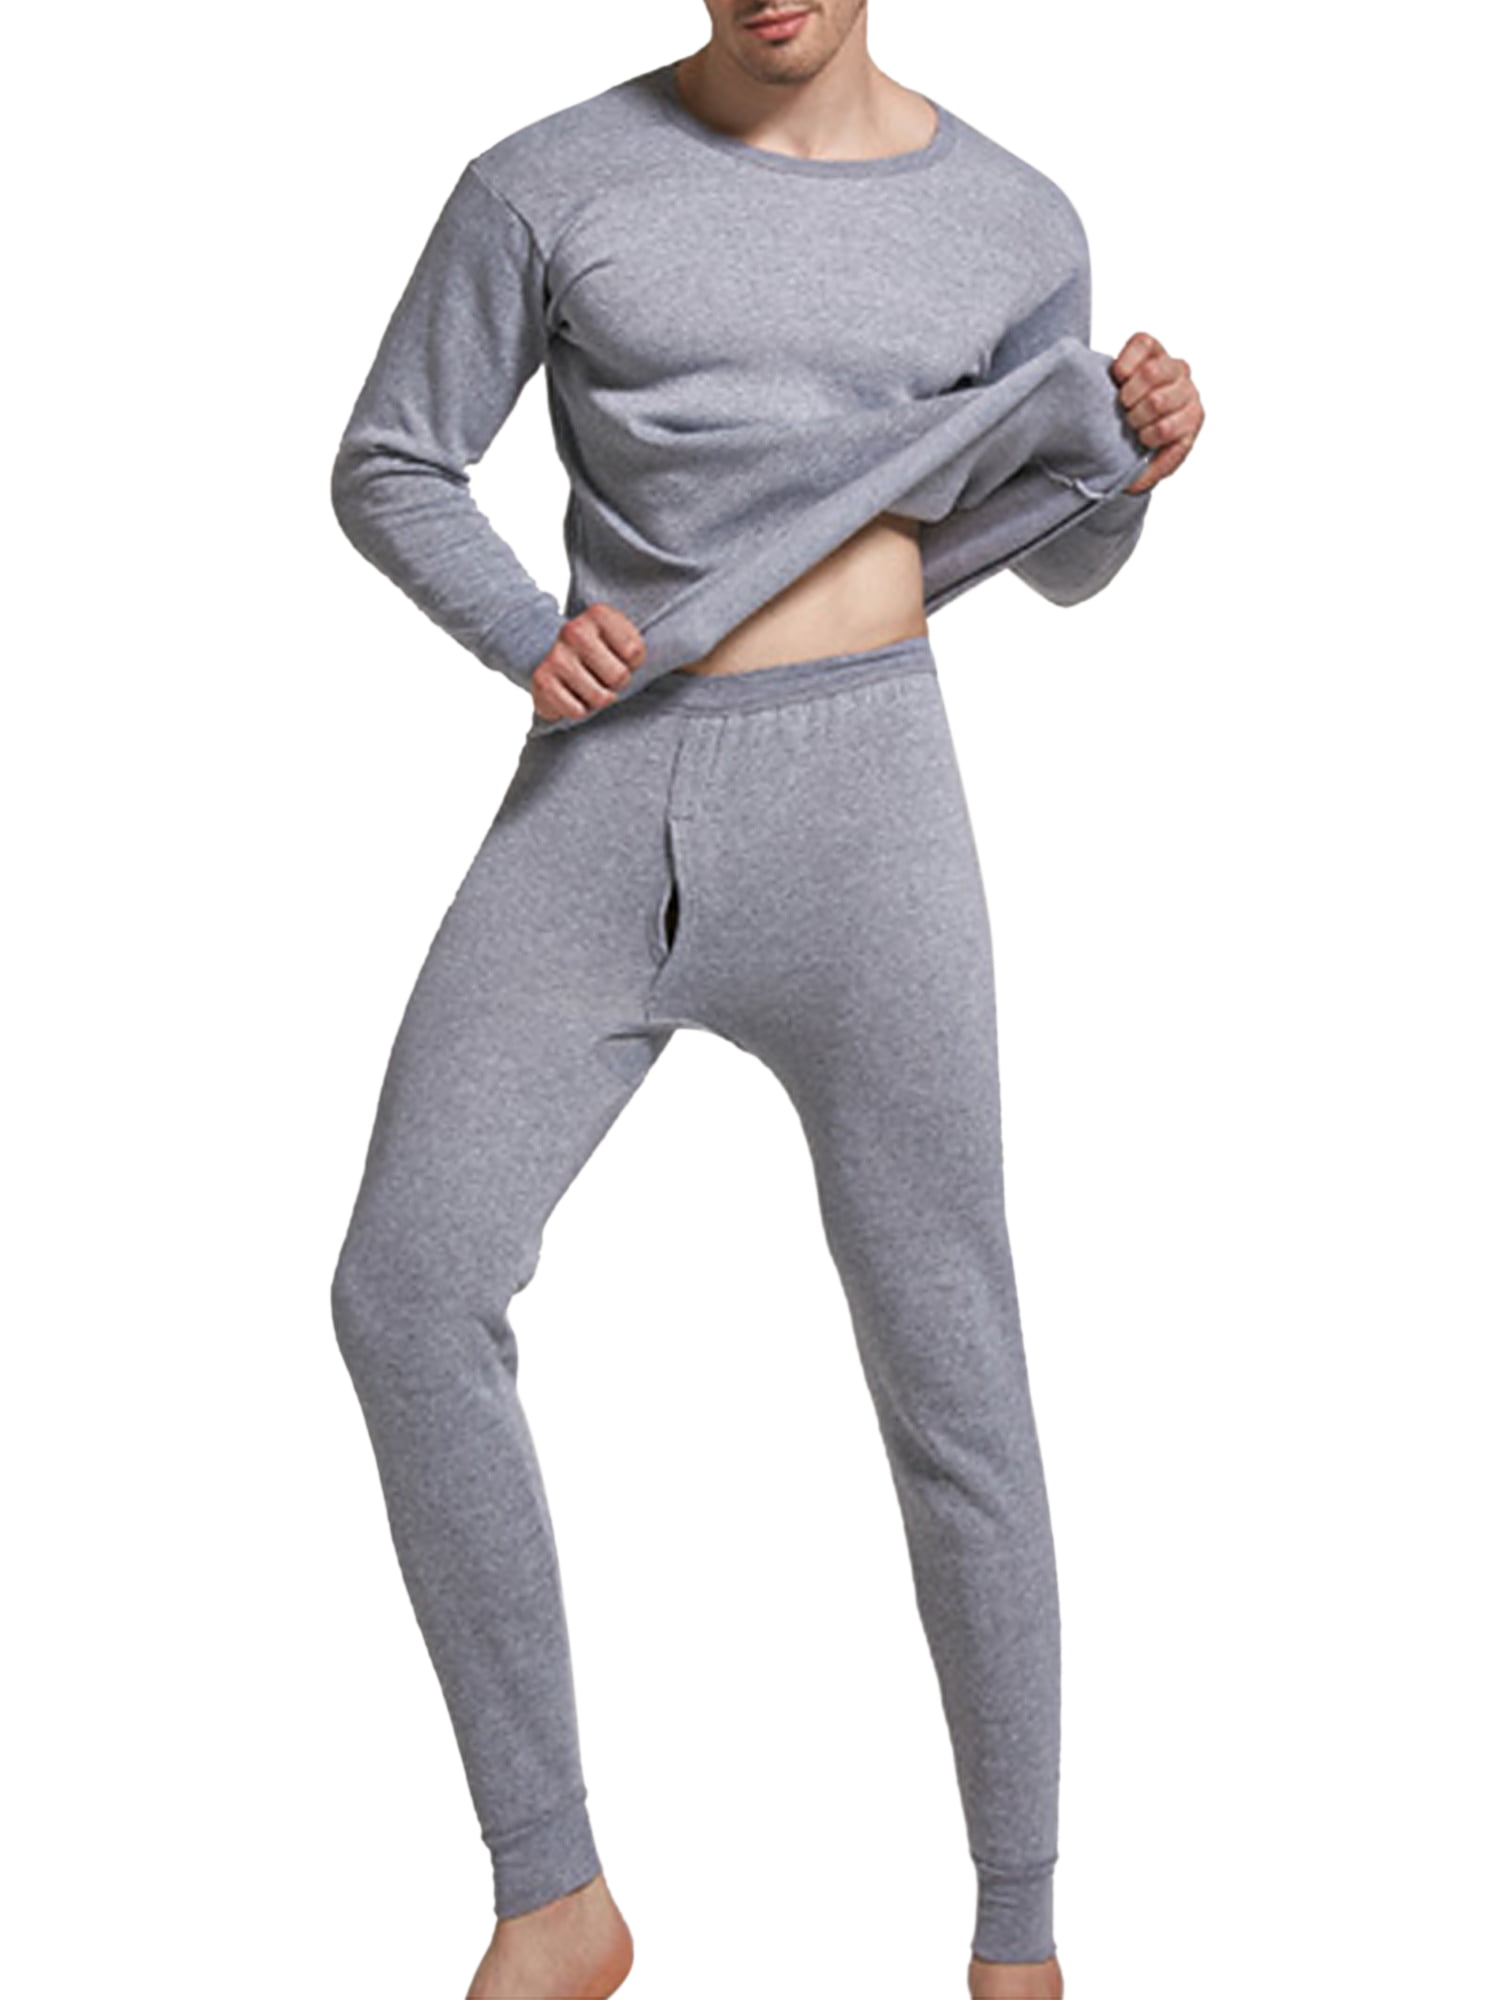 Mens Thermal Underwear Set Ultra Soft Fleece Lined Warm Extreme Cold Long Johns 